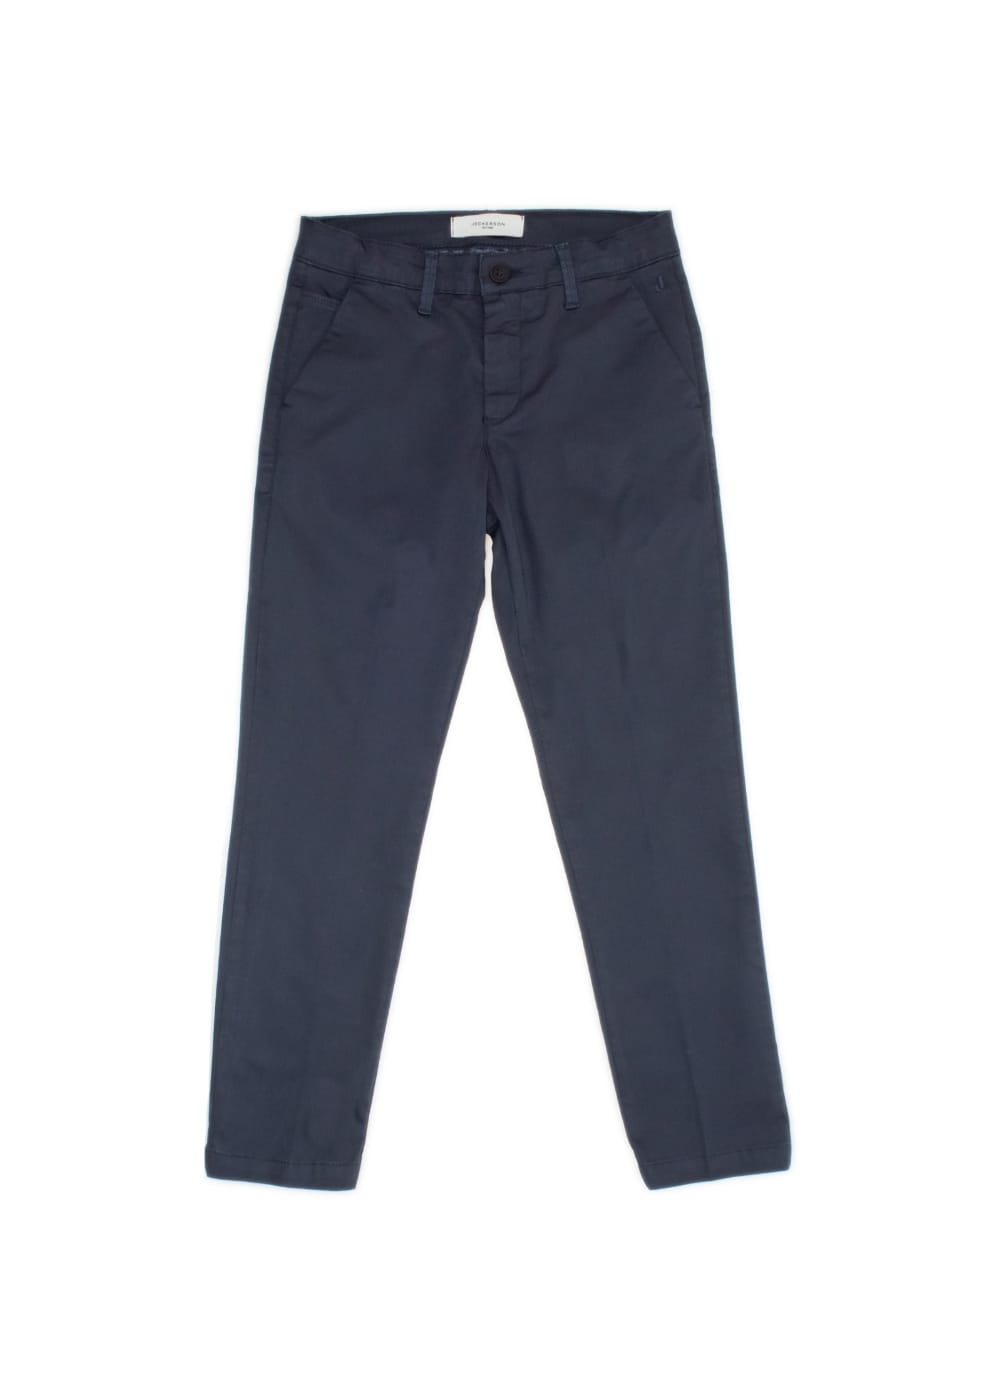 Featured image for “Jeckerson Pantalone Chino”